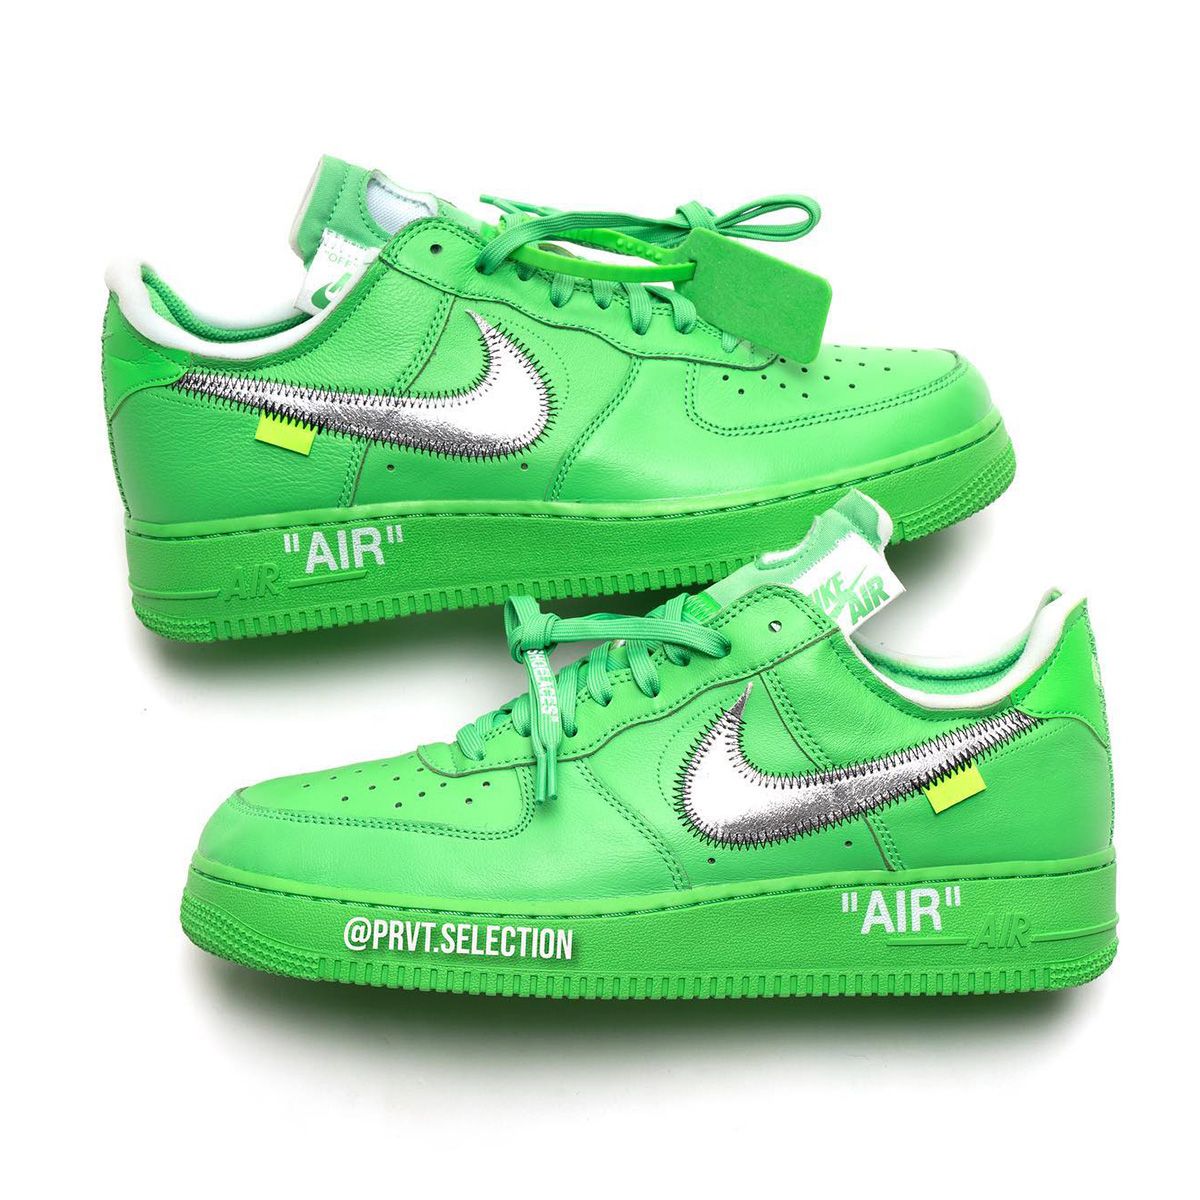 erosion mourning Incompetence Where to Buy the OFF-WHITE x Nike Air Force 1 Low "Brooklyn" | HOUSE OF HEAT